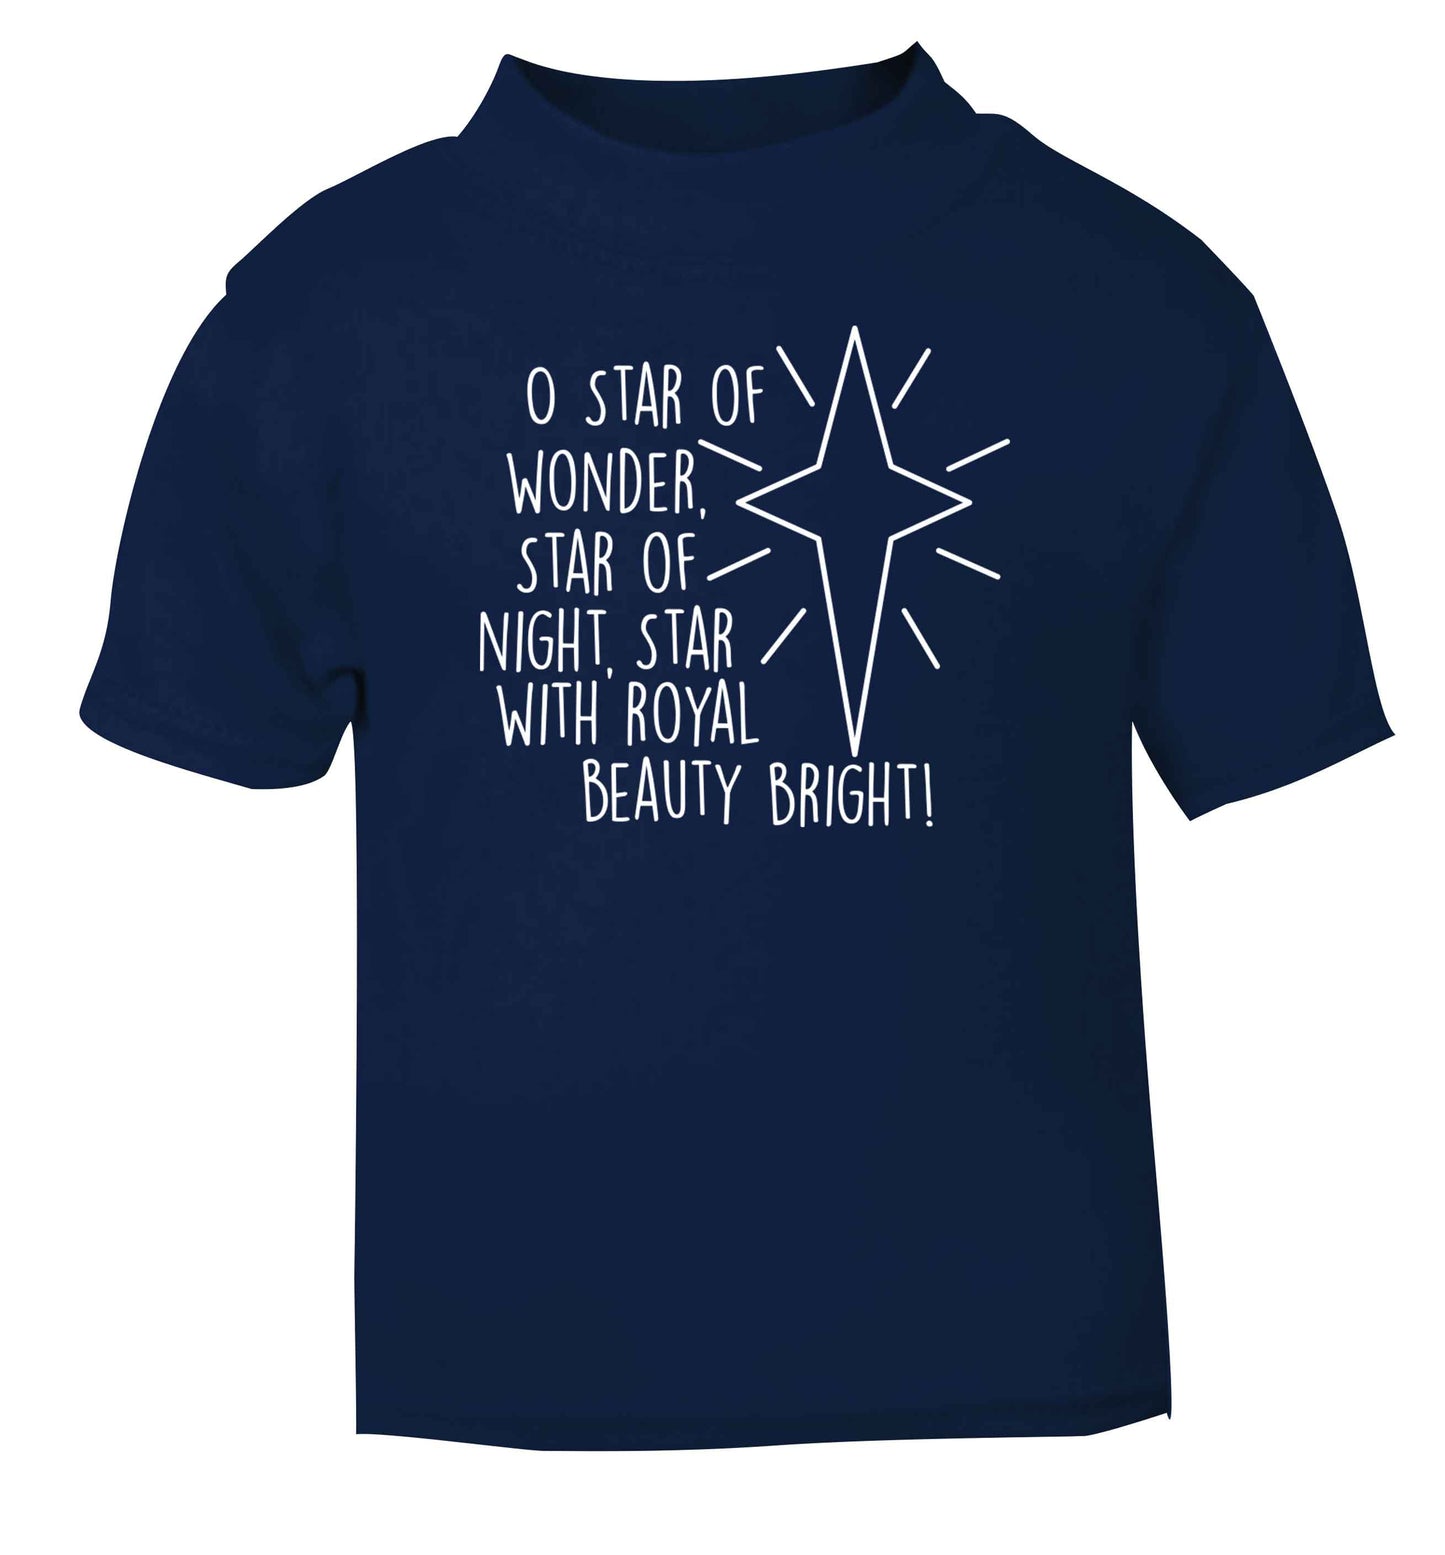 Oh star of wonder star of night, star with royal beauty bright navy baby toddler Tshirt 2 Years